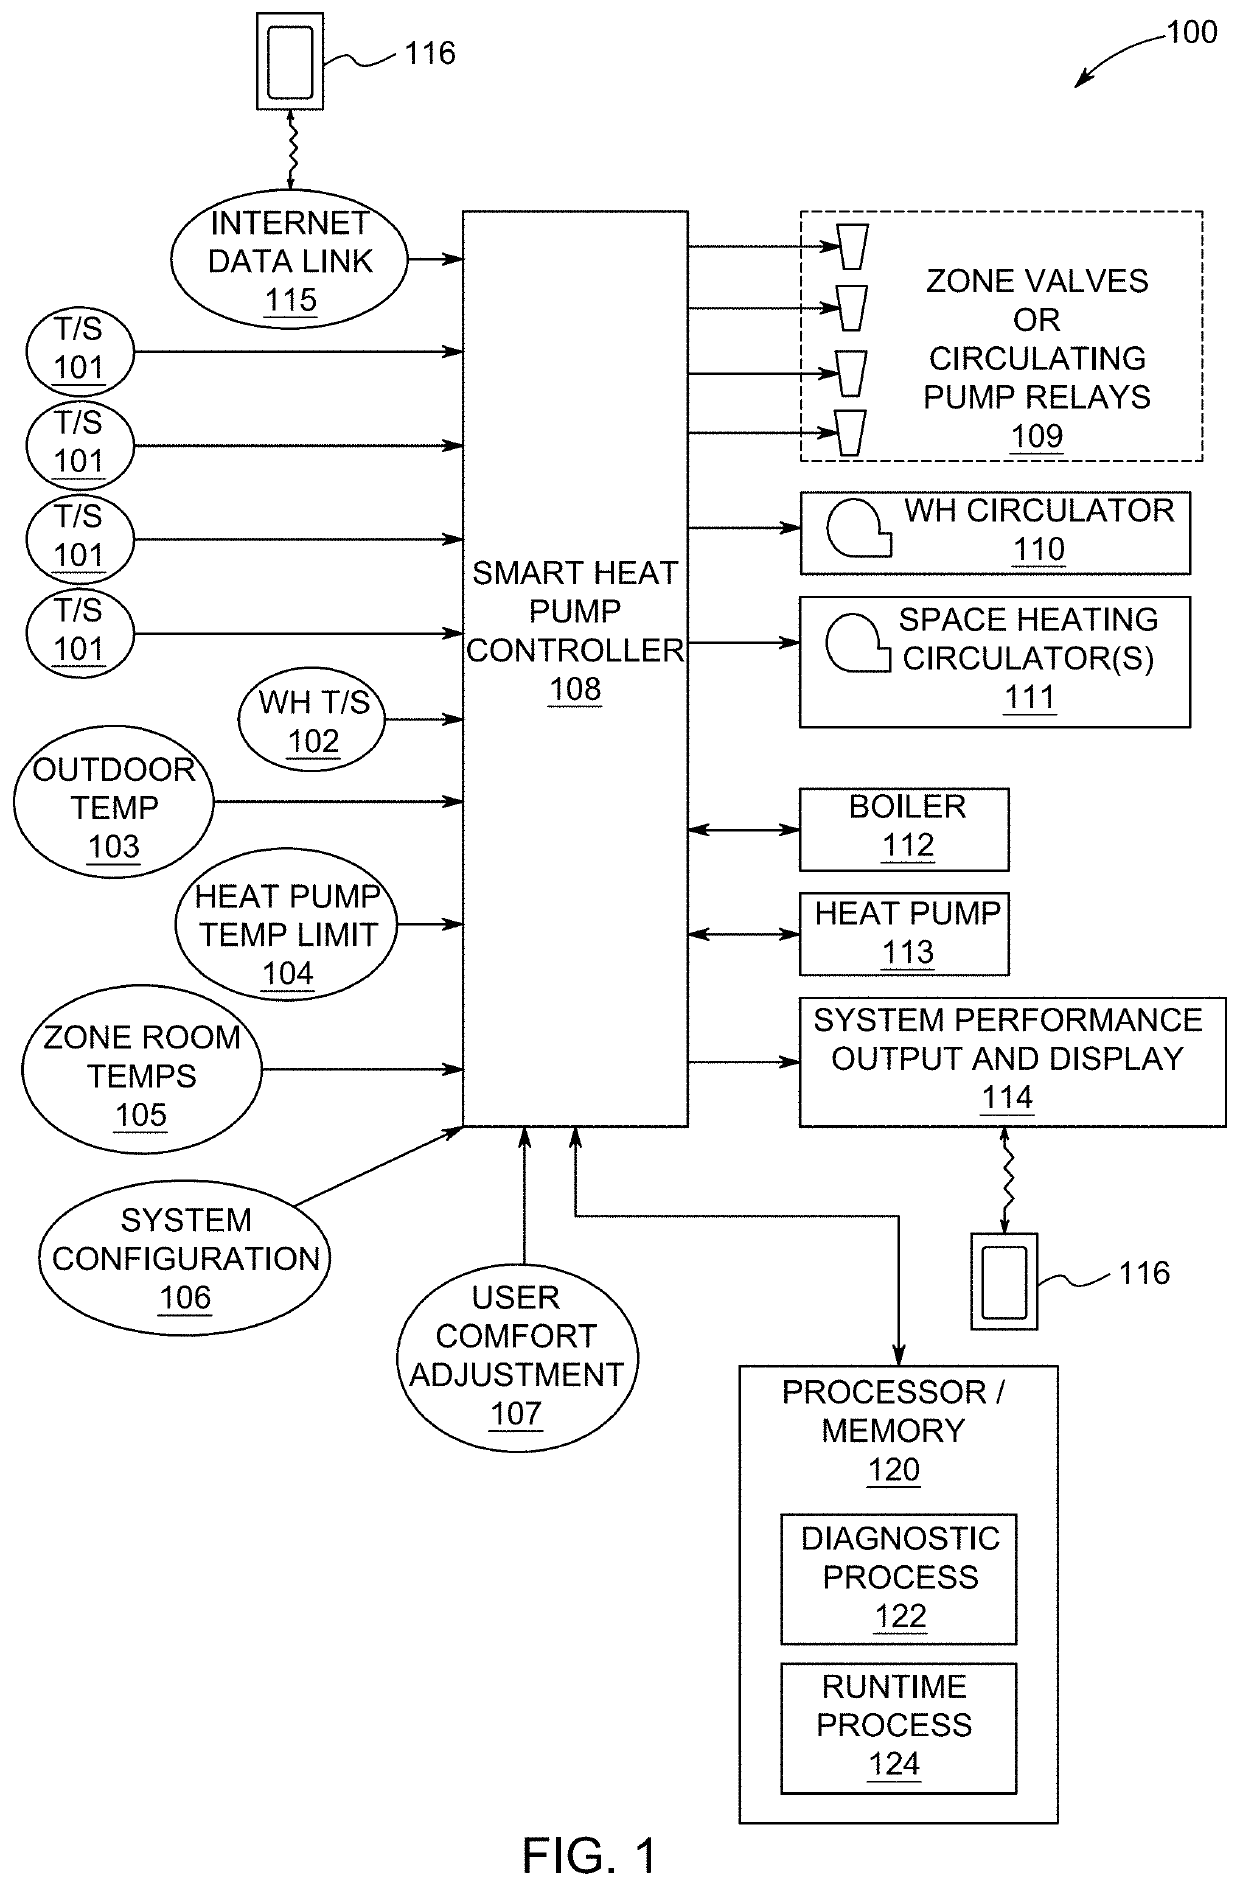 Controller for heating system diagnostics and operation